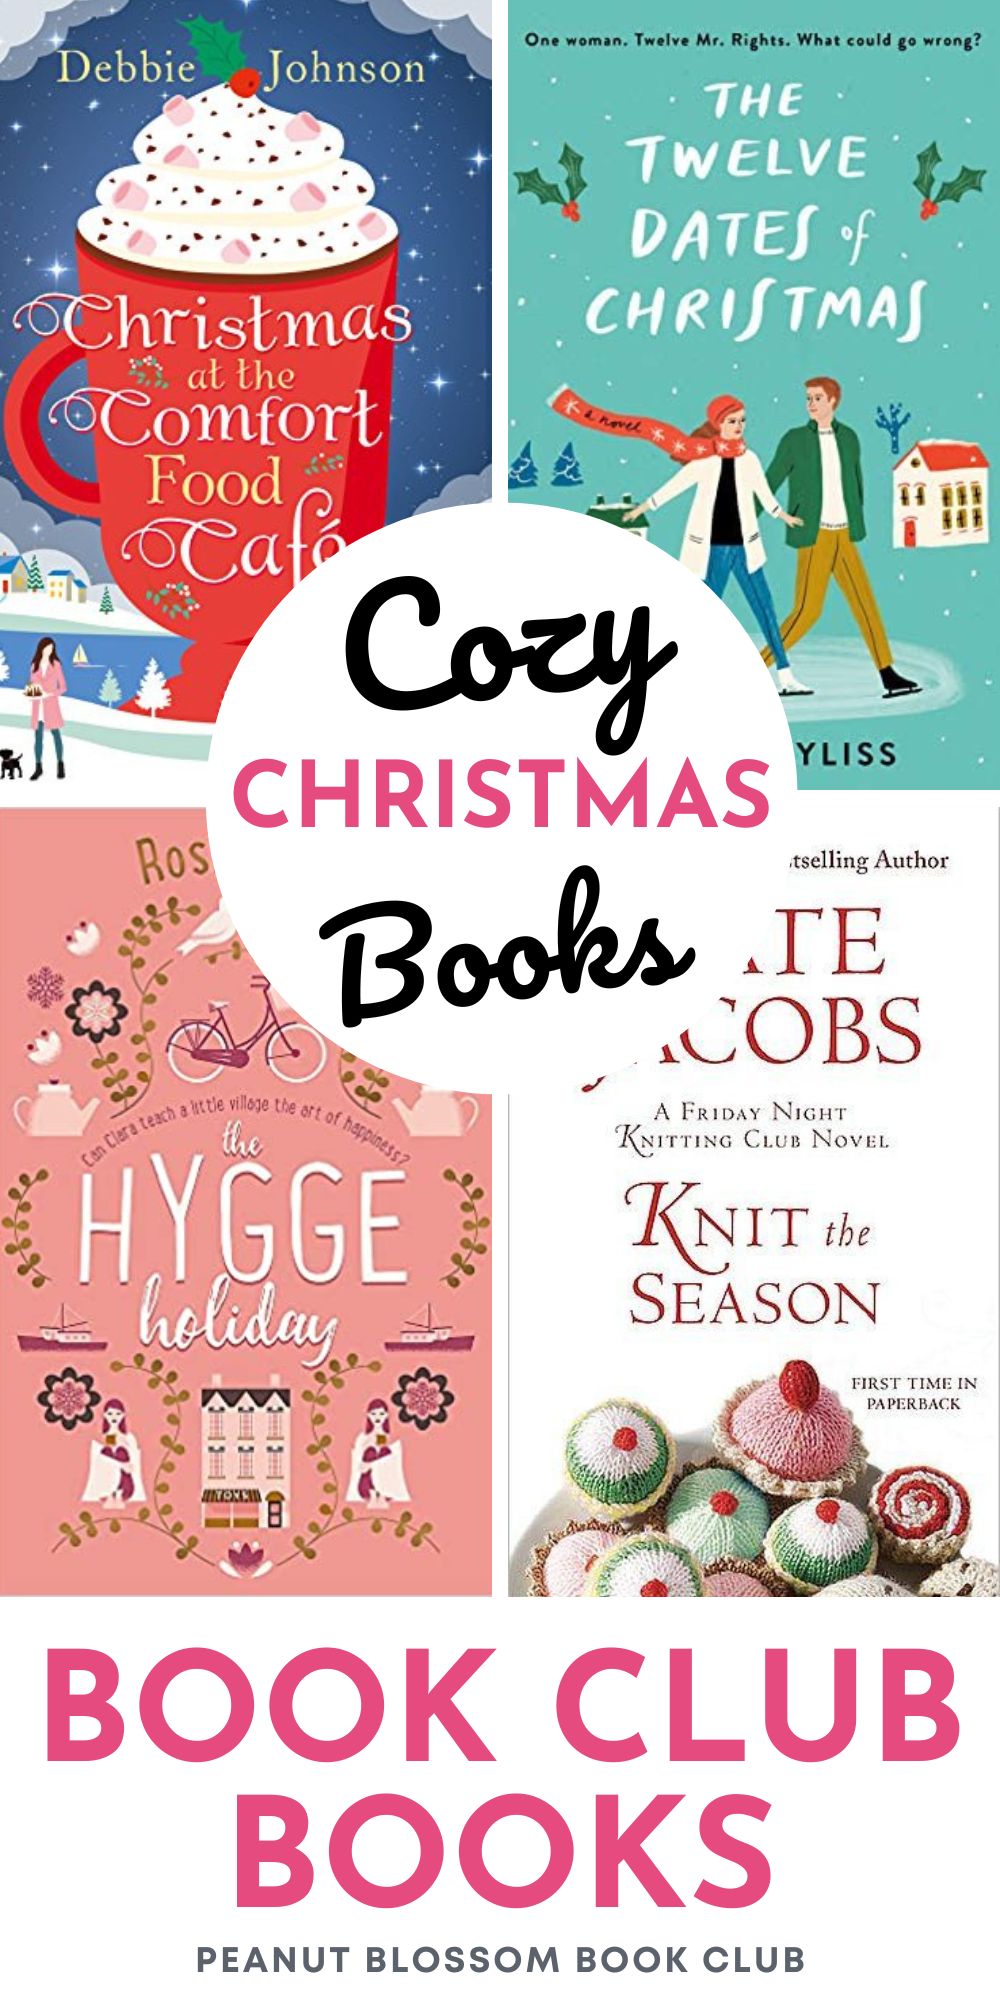 The photo collage shows 4 Christmas books for book club.